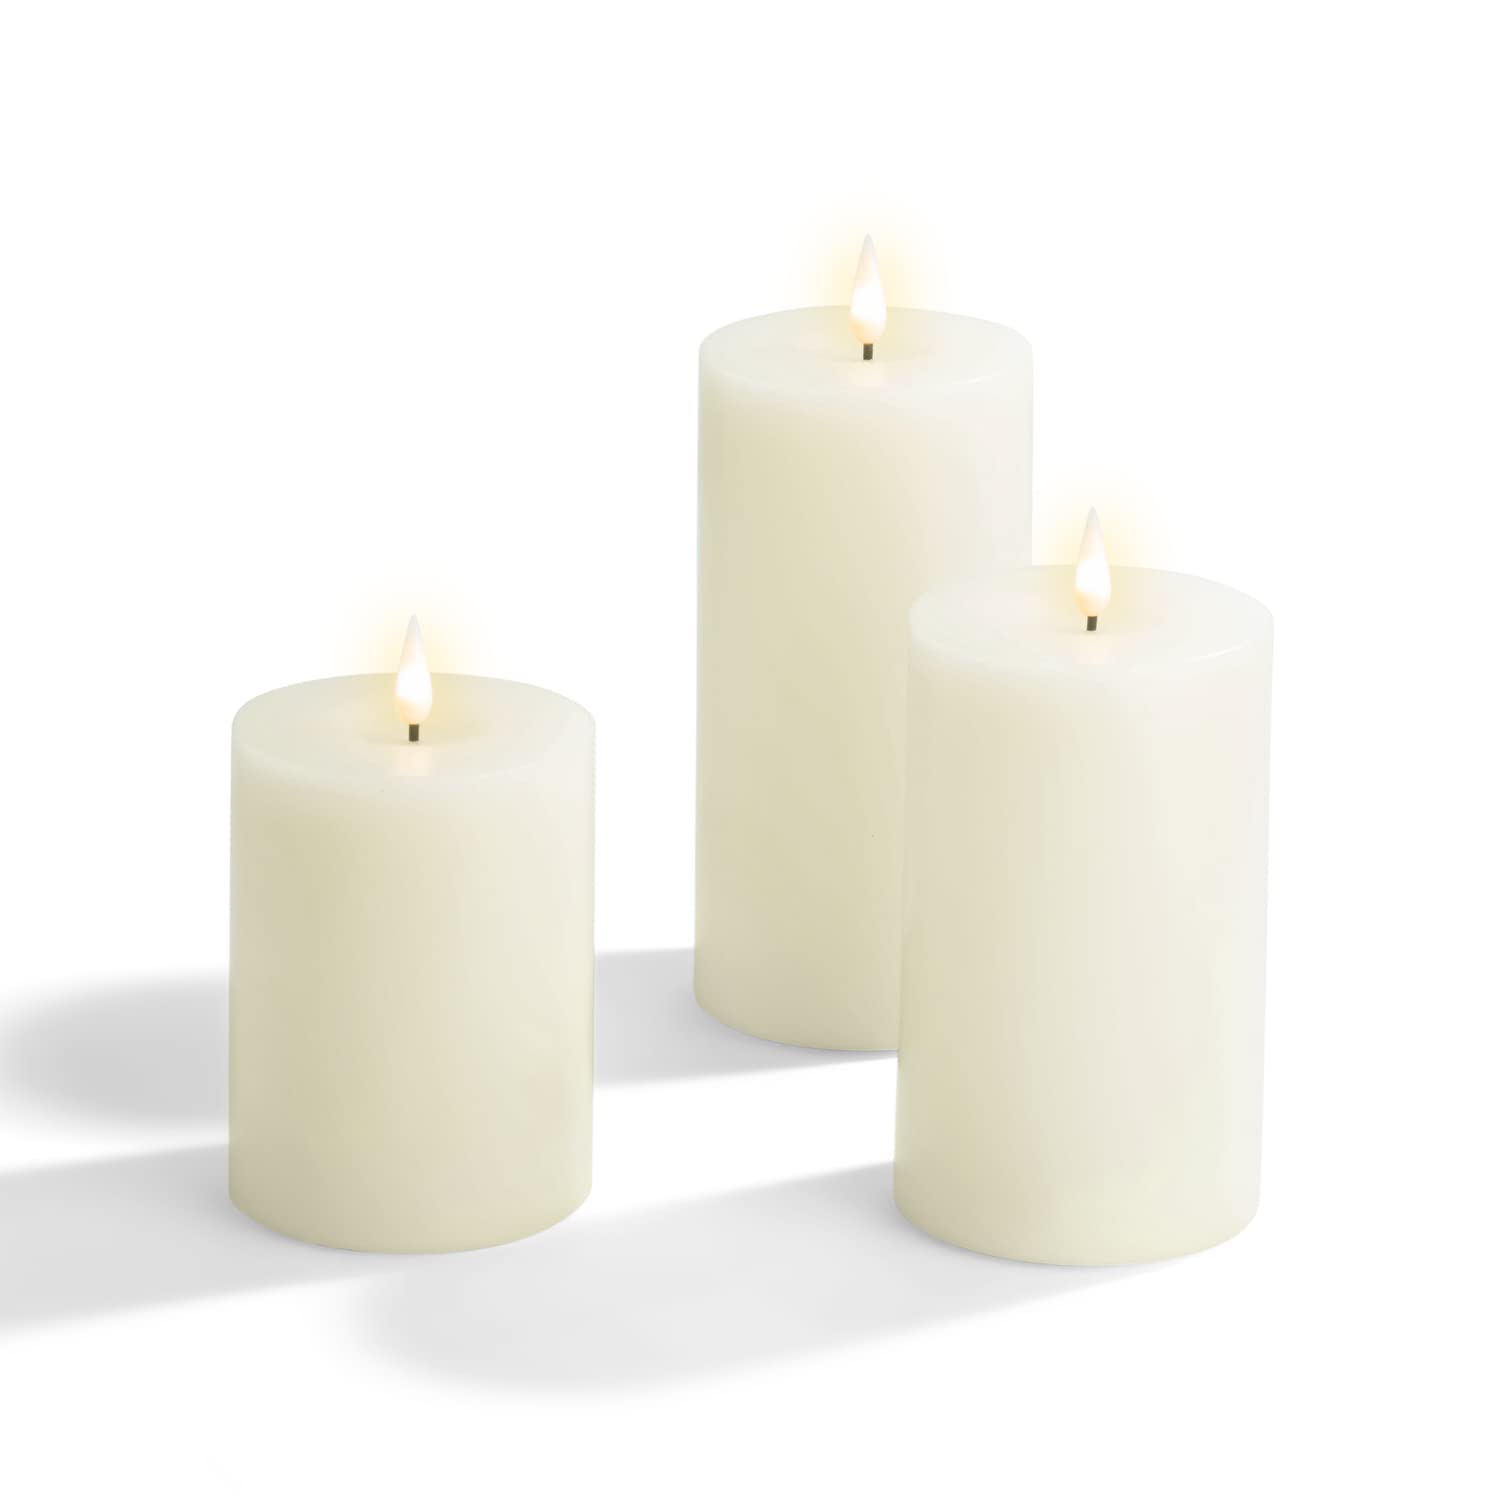 LampLust Realistic Flameless Candles with Remote - Set of 3, Batteries Included, Real Wax, 3D Flickering LED Flame, 3 Inch Diameter Pillar Candles for Mantel Decor, Valentine & Wedding Decorations